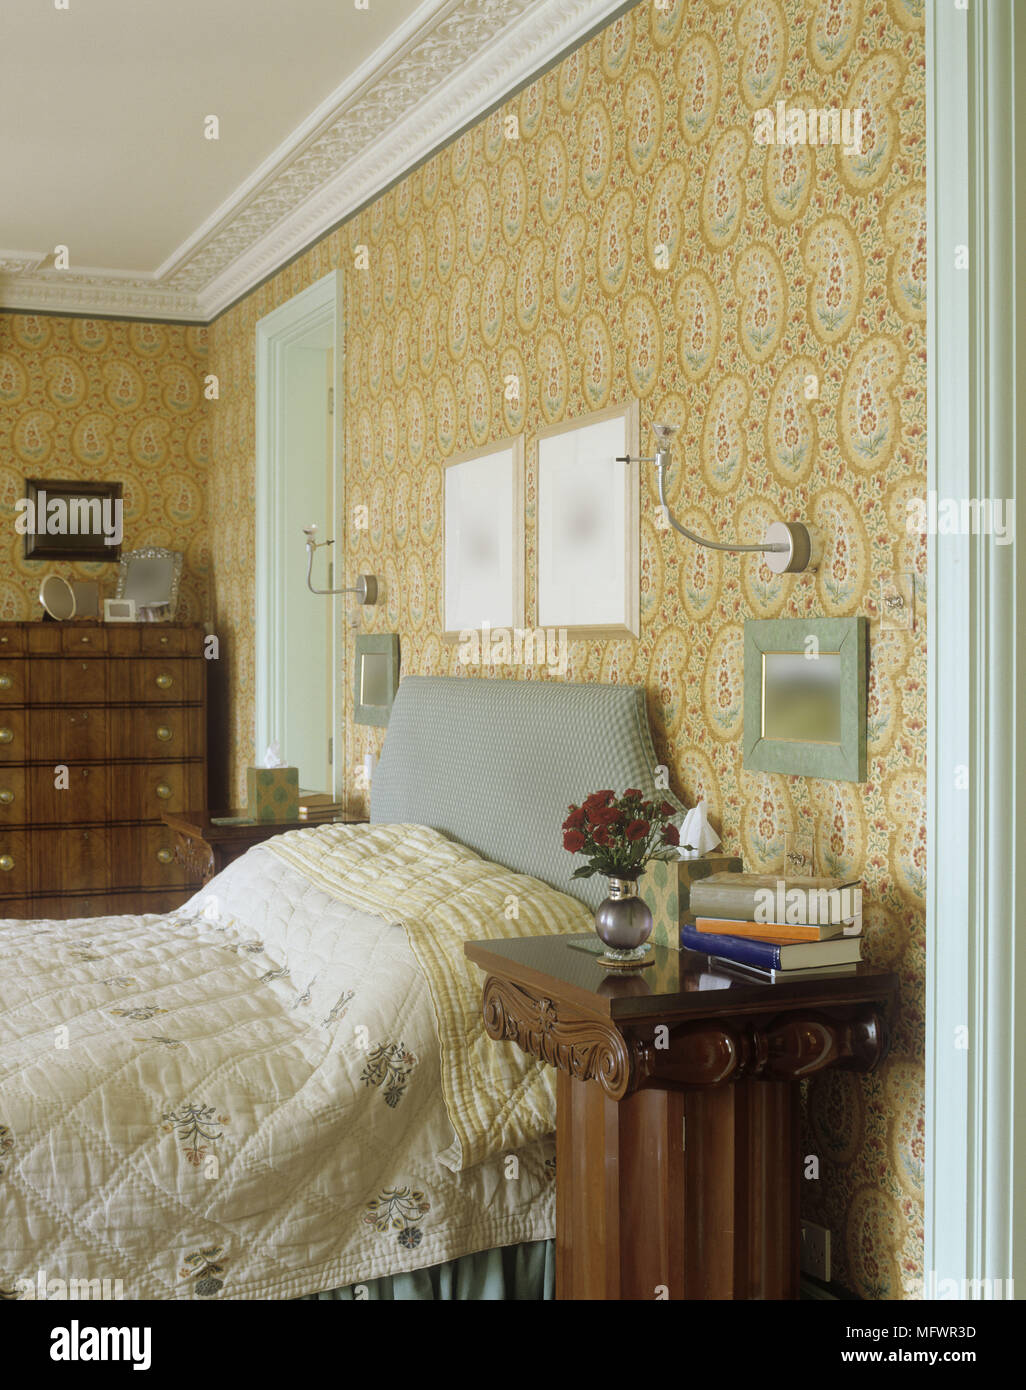 Bed In Bedroom With Patterned Wallpaper And Wooden Bedside